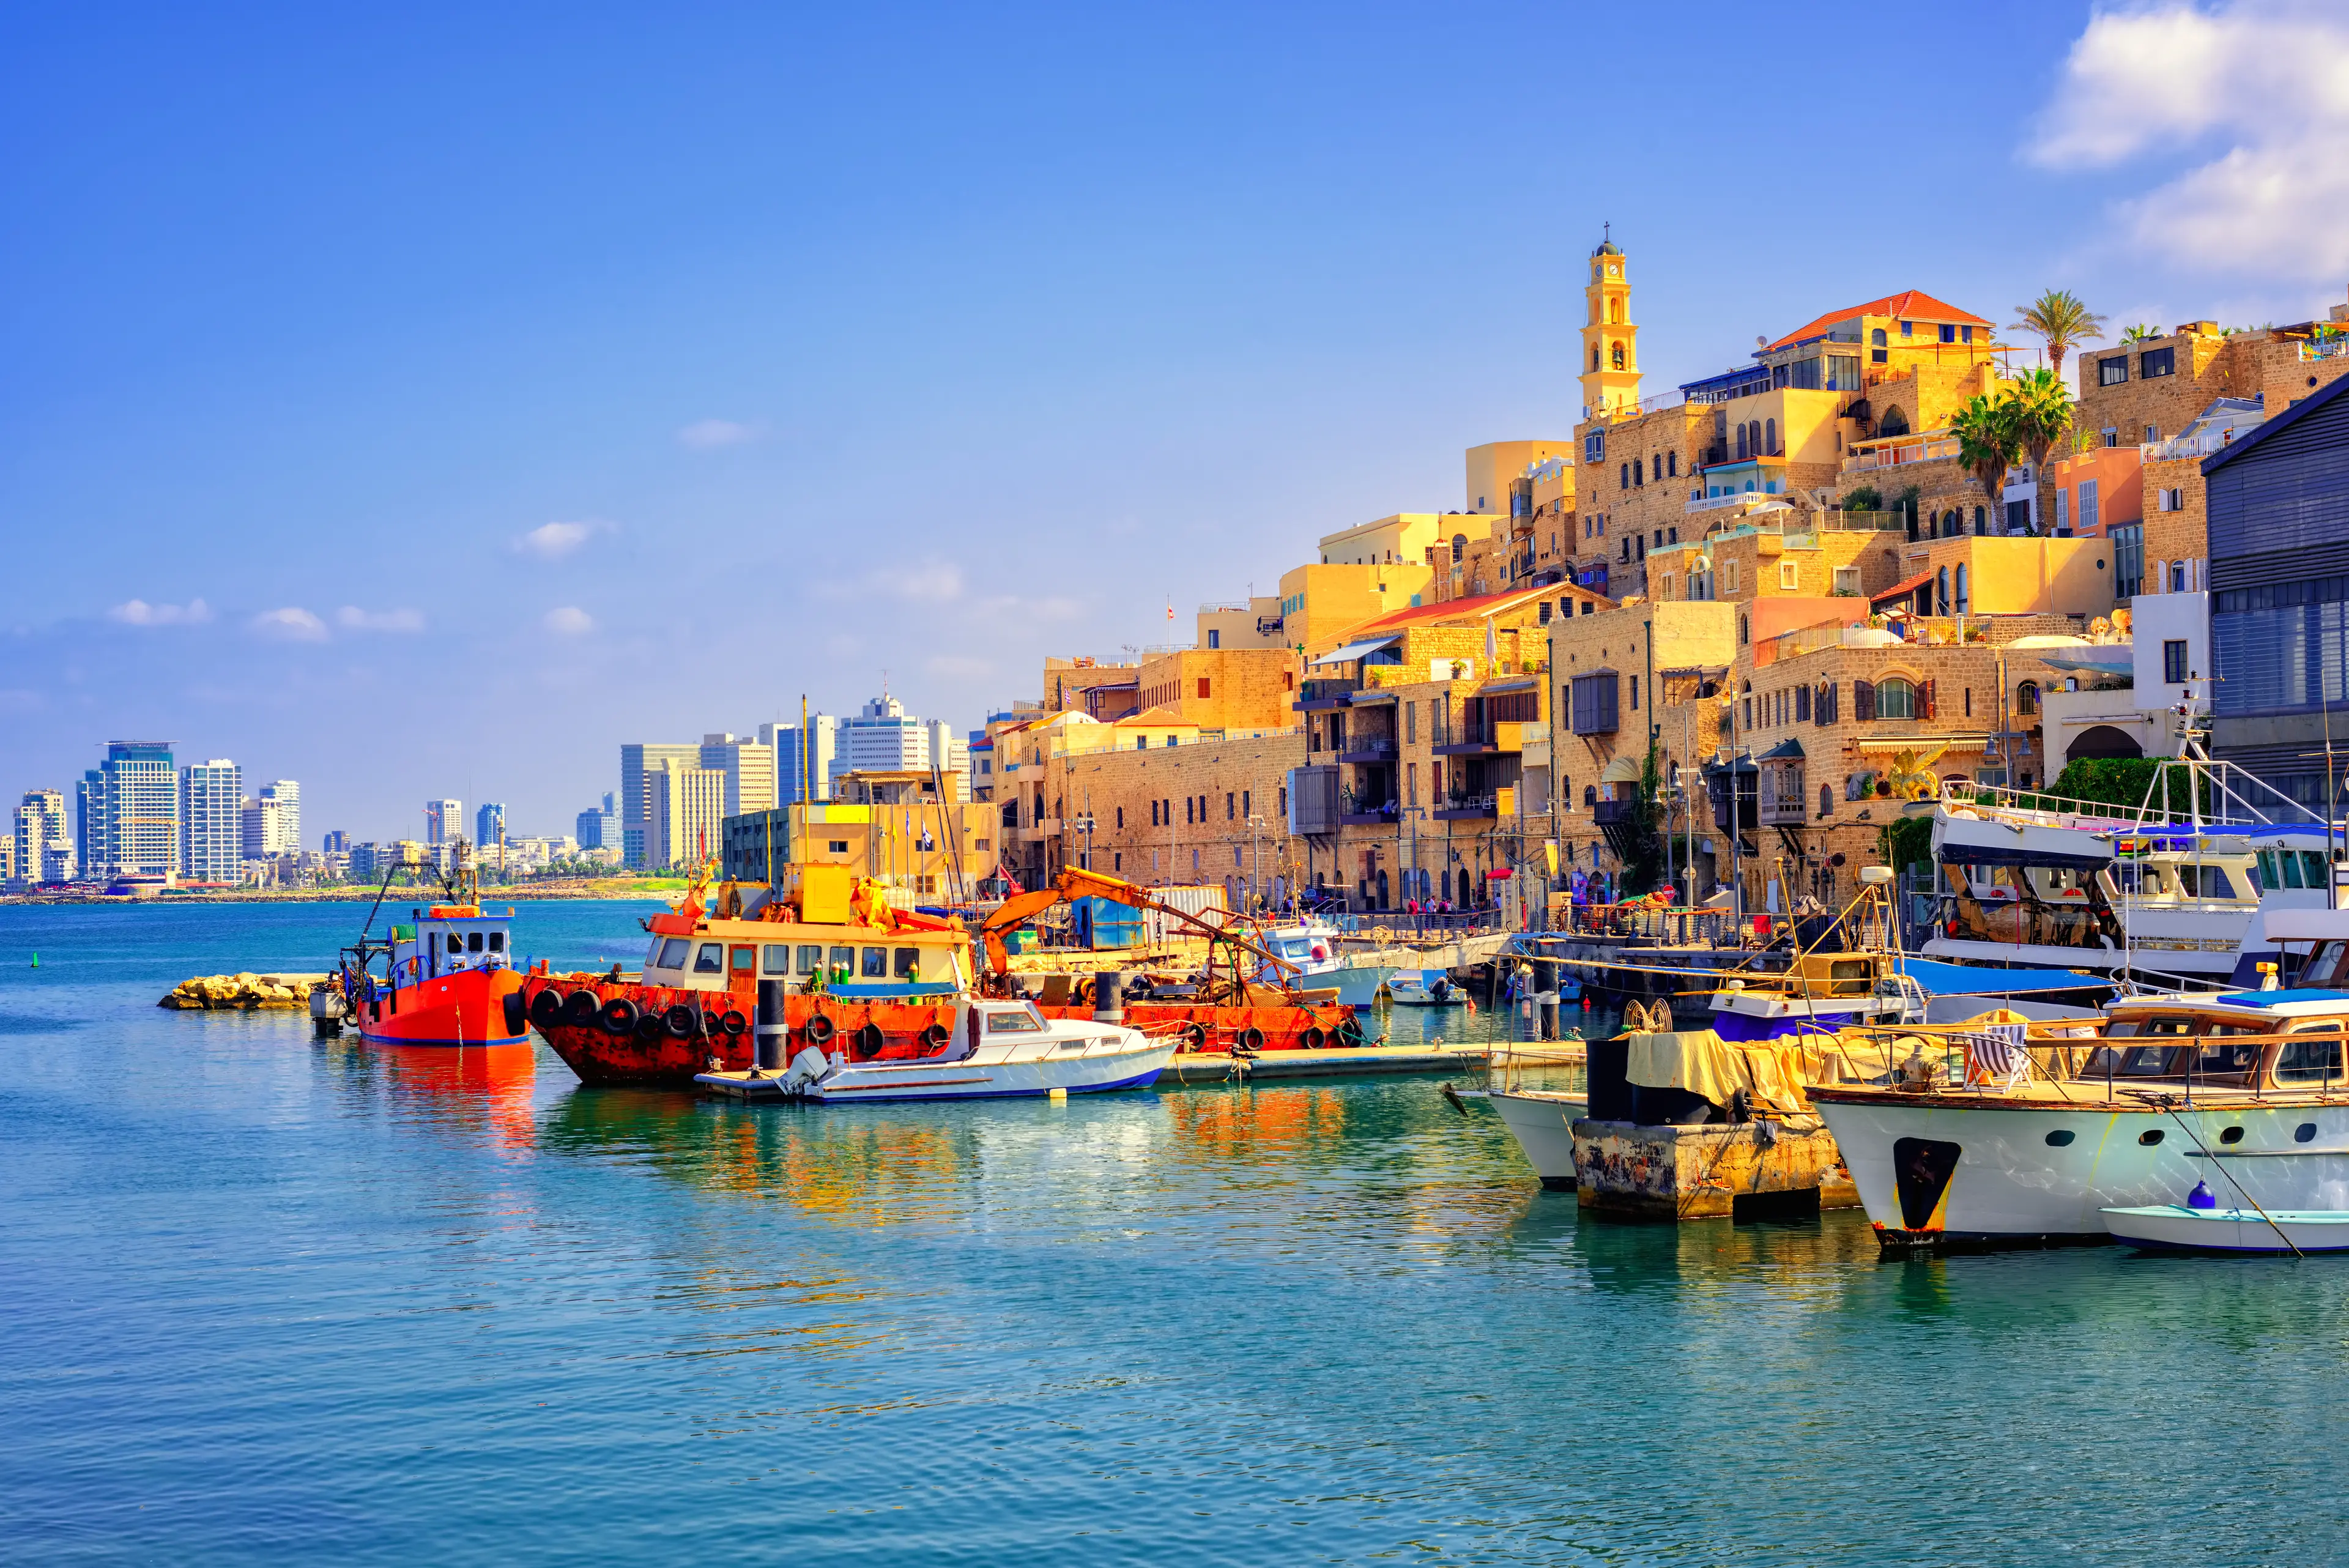 1-Day Tel Aviv Adventure: Sightseeing, Nightlife & Shopping with Friends